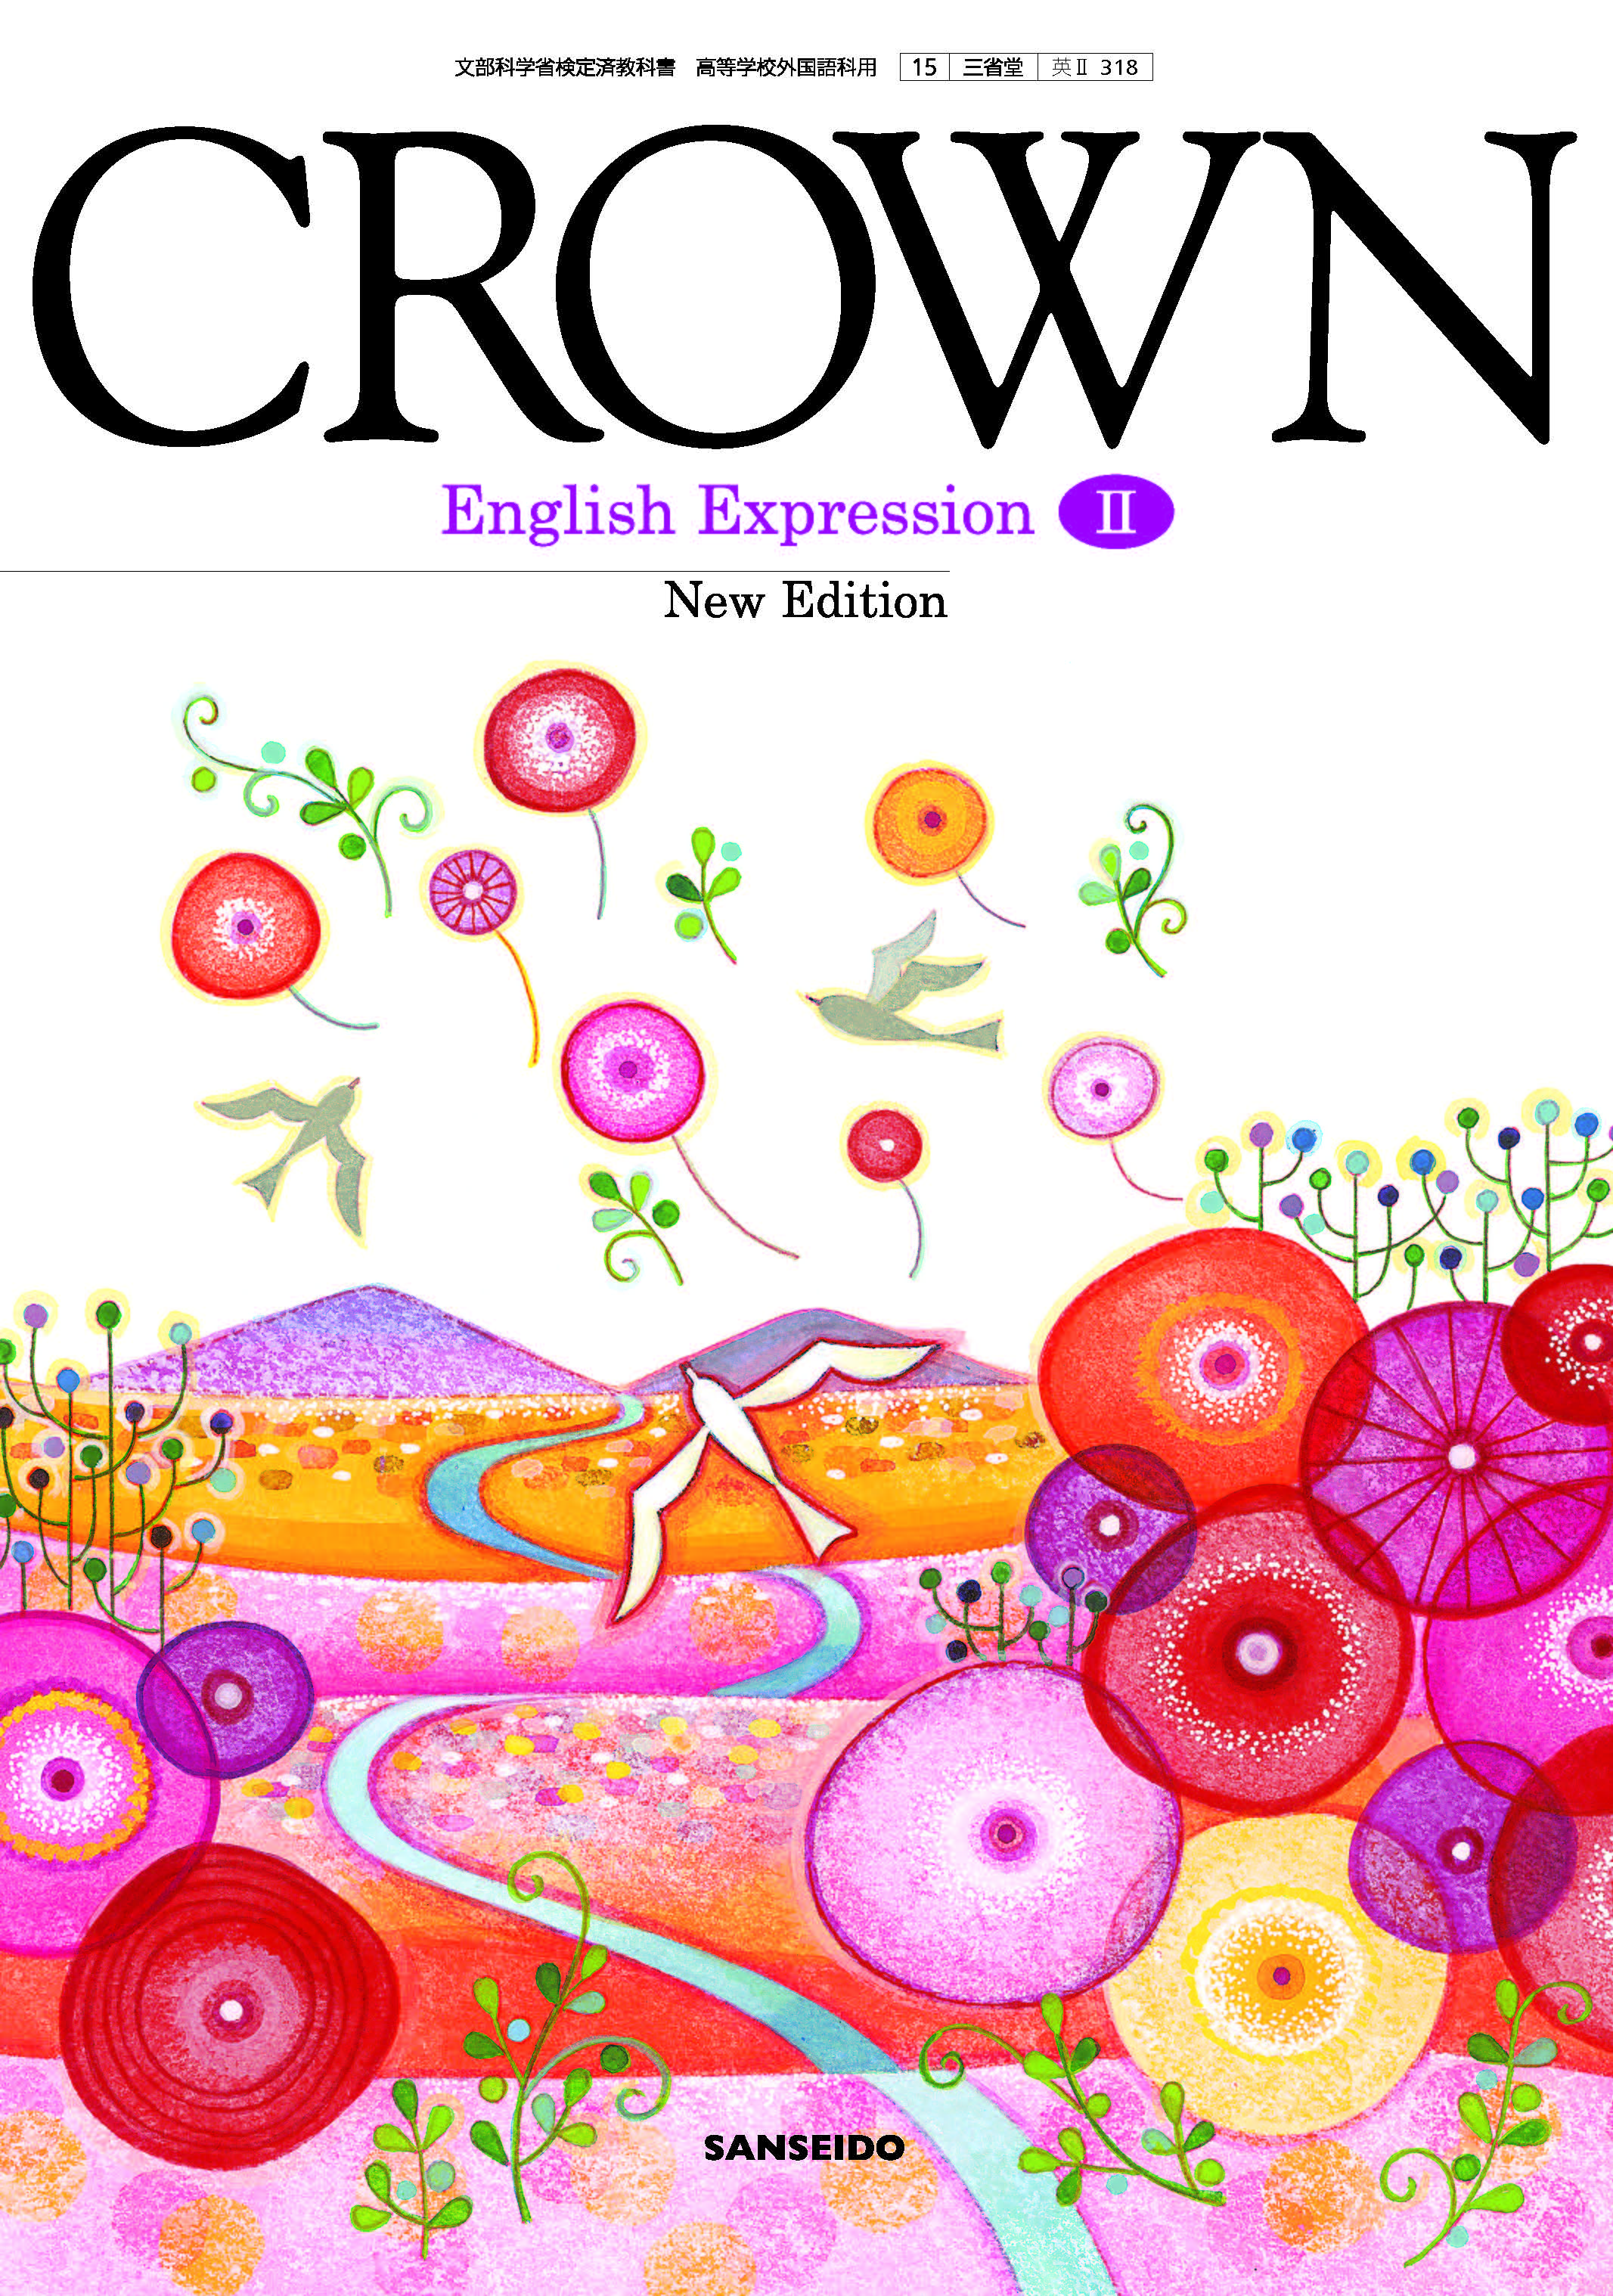 CROWN English Expression Ⅱ New Edition 英Ⅱ 318